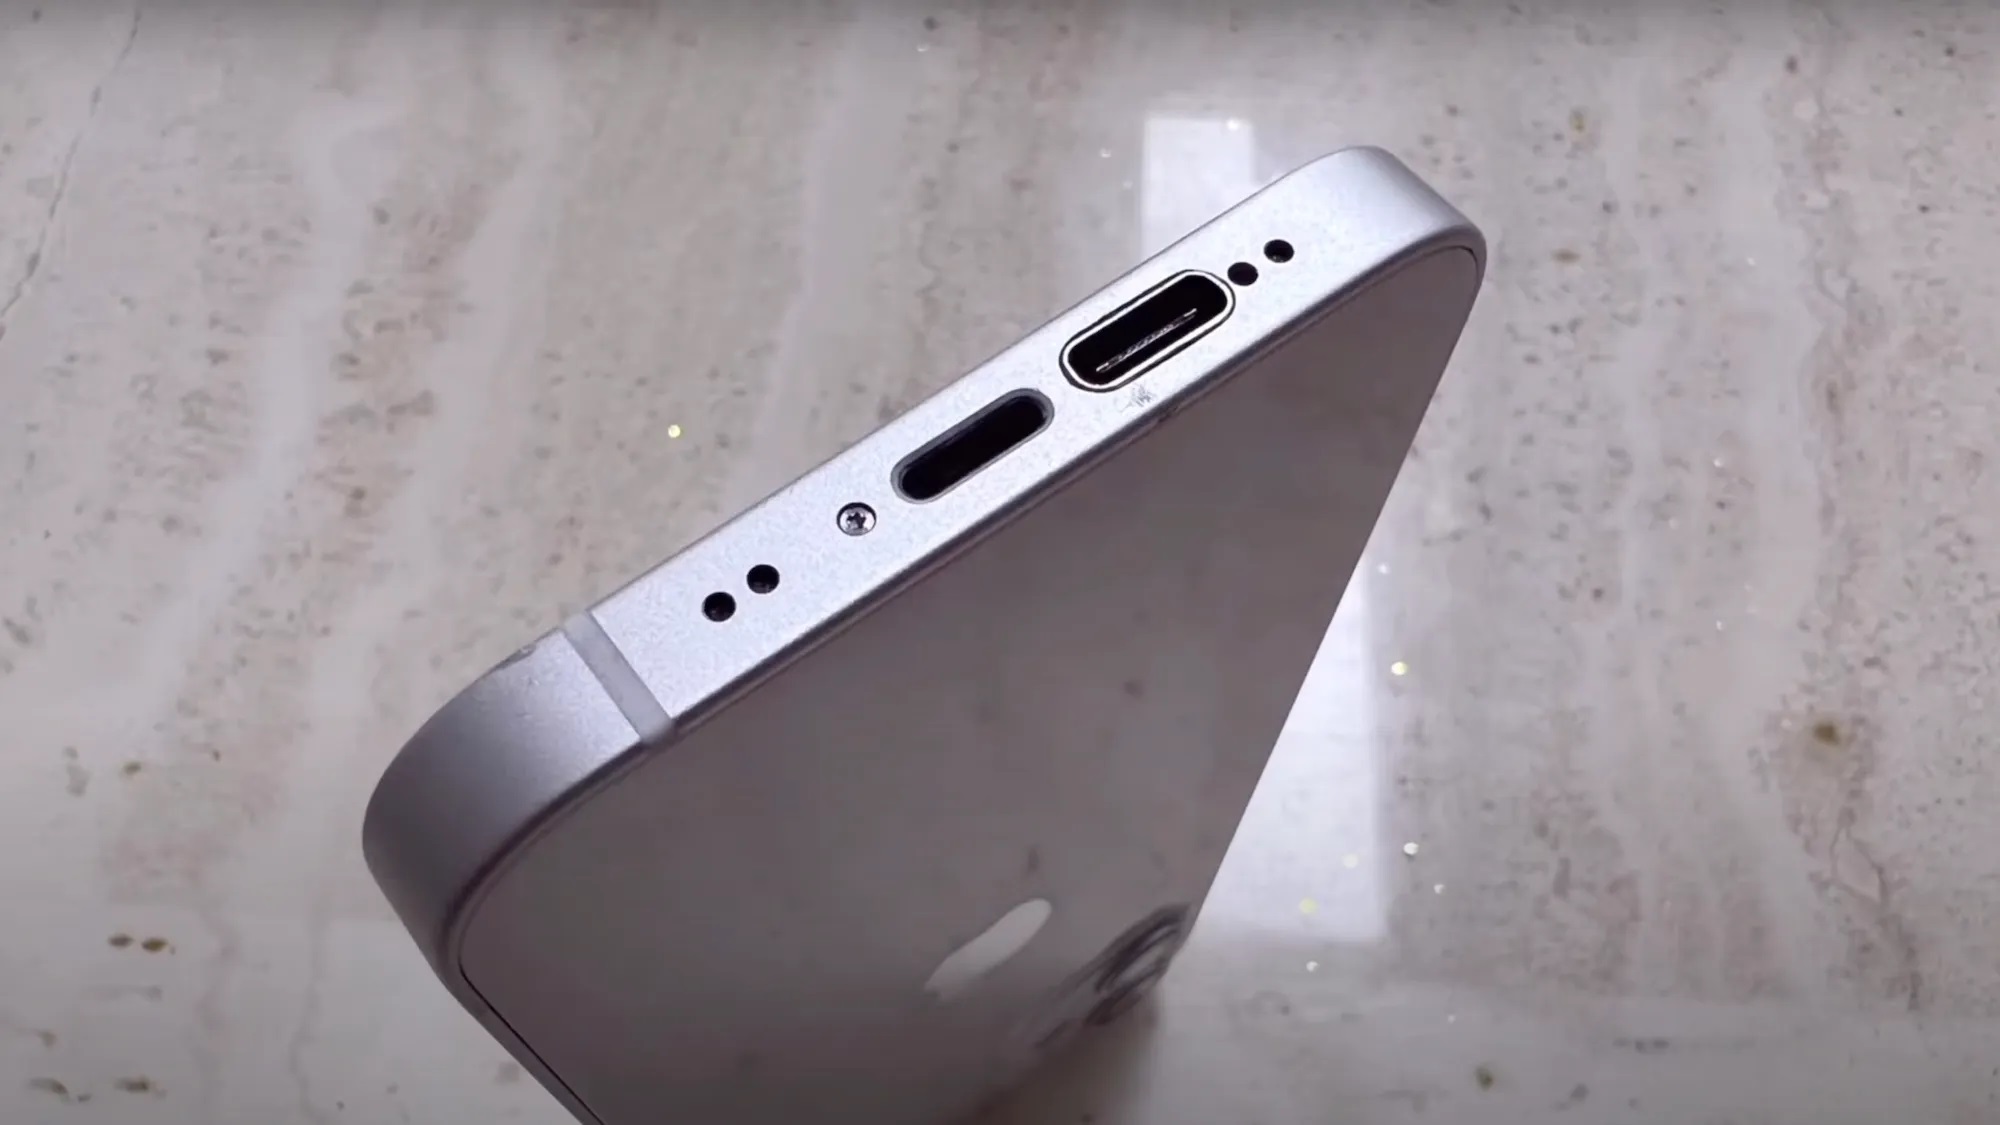 Why to choose? An enthusiast has made an iPhone with two connectors - Lightning and USB-C